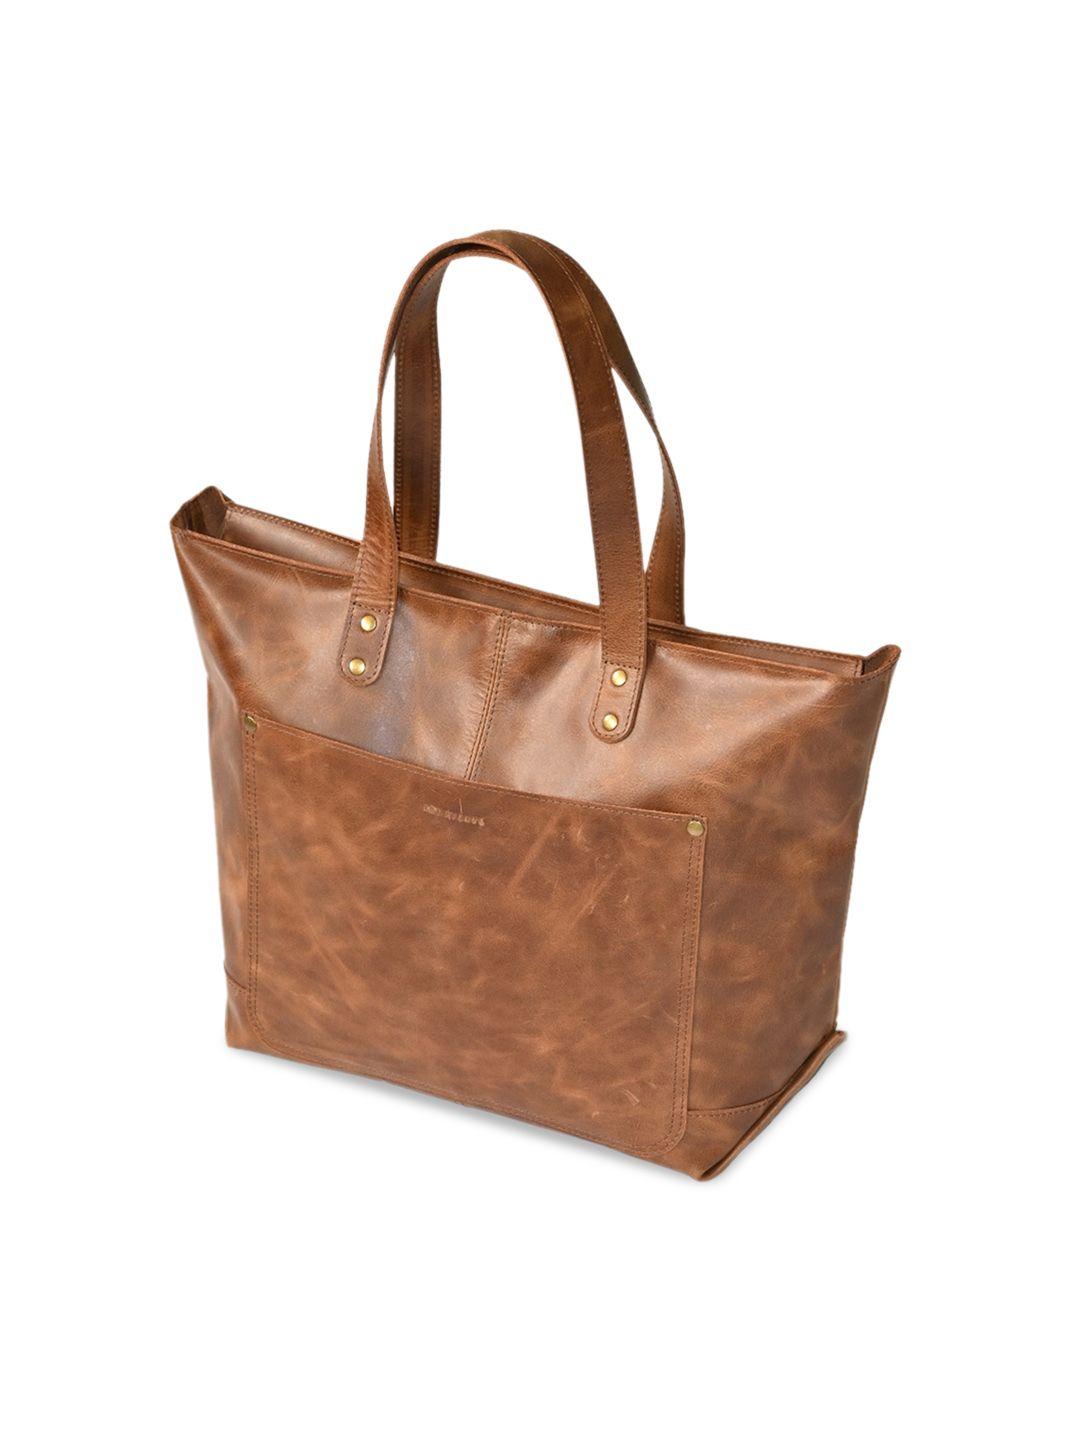 art avenue structured leather tote bag